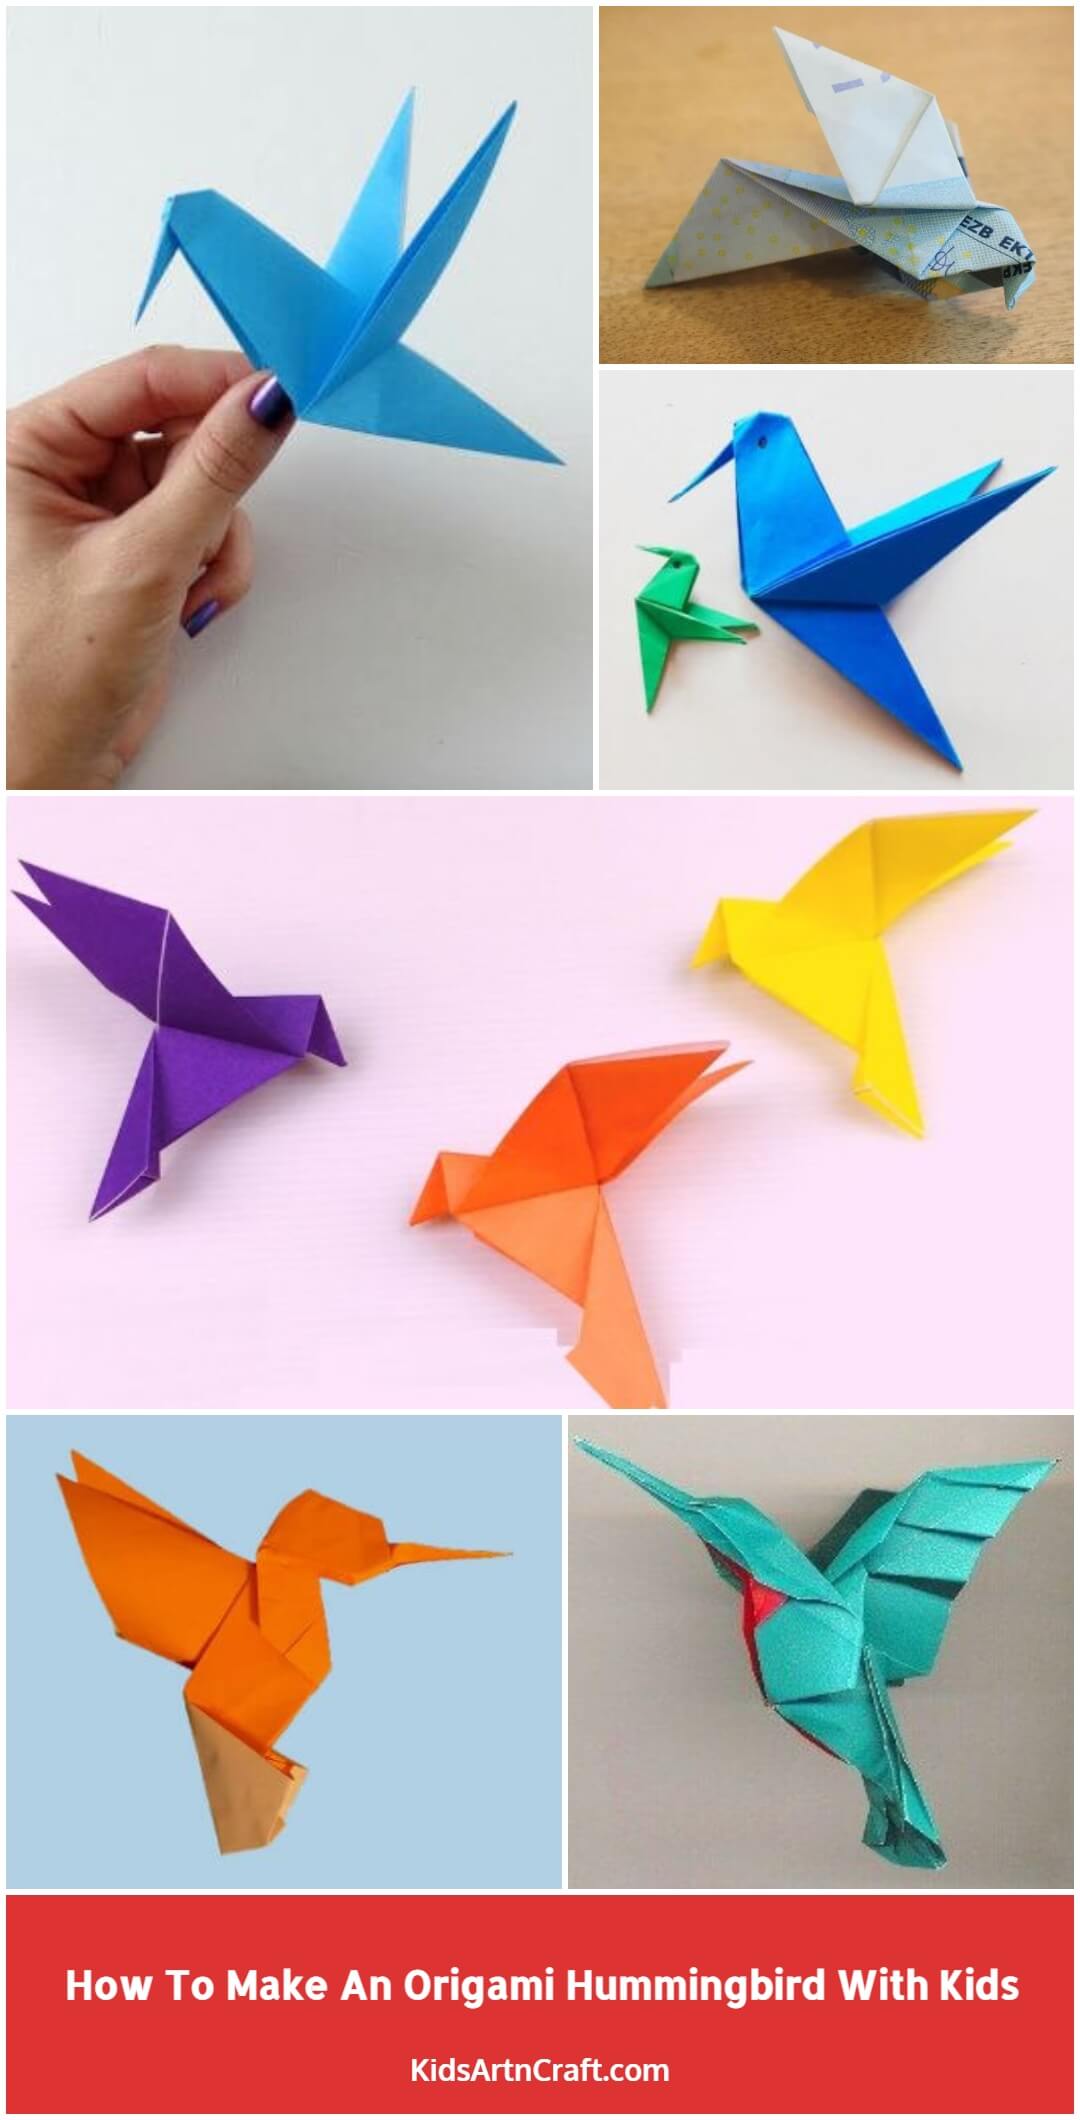 How To Make An Origami Hummingbird With Kids